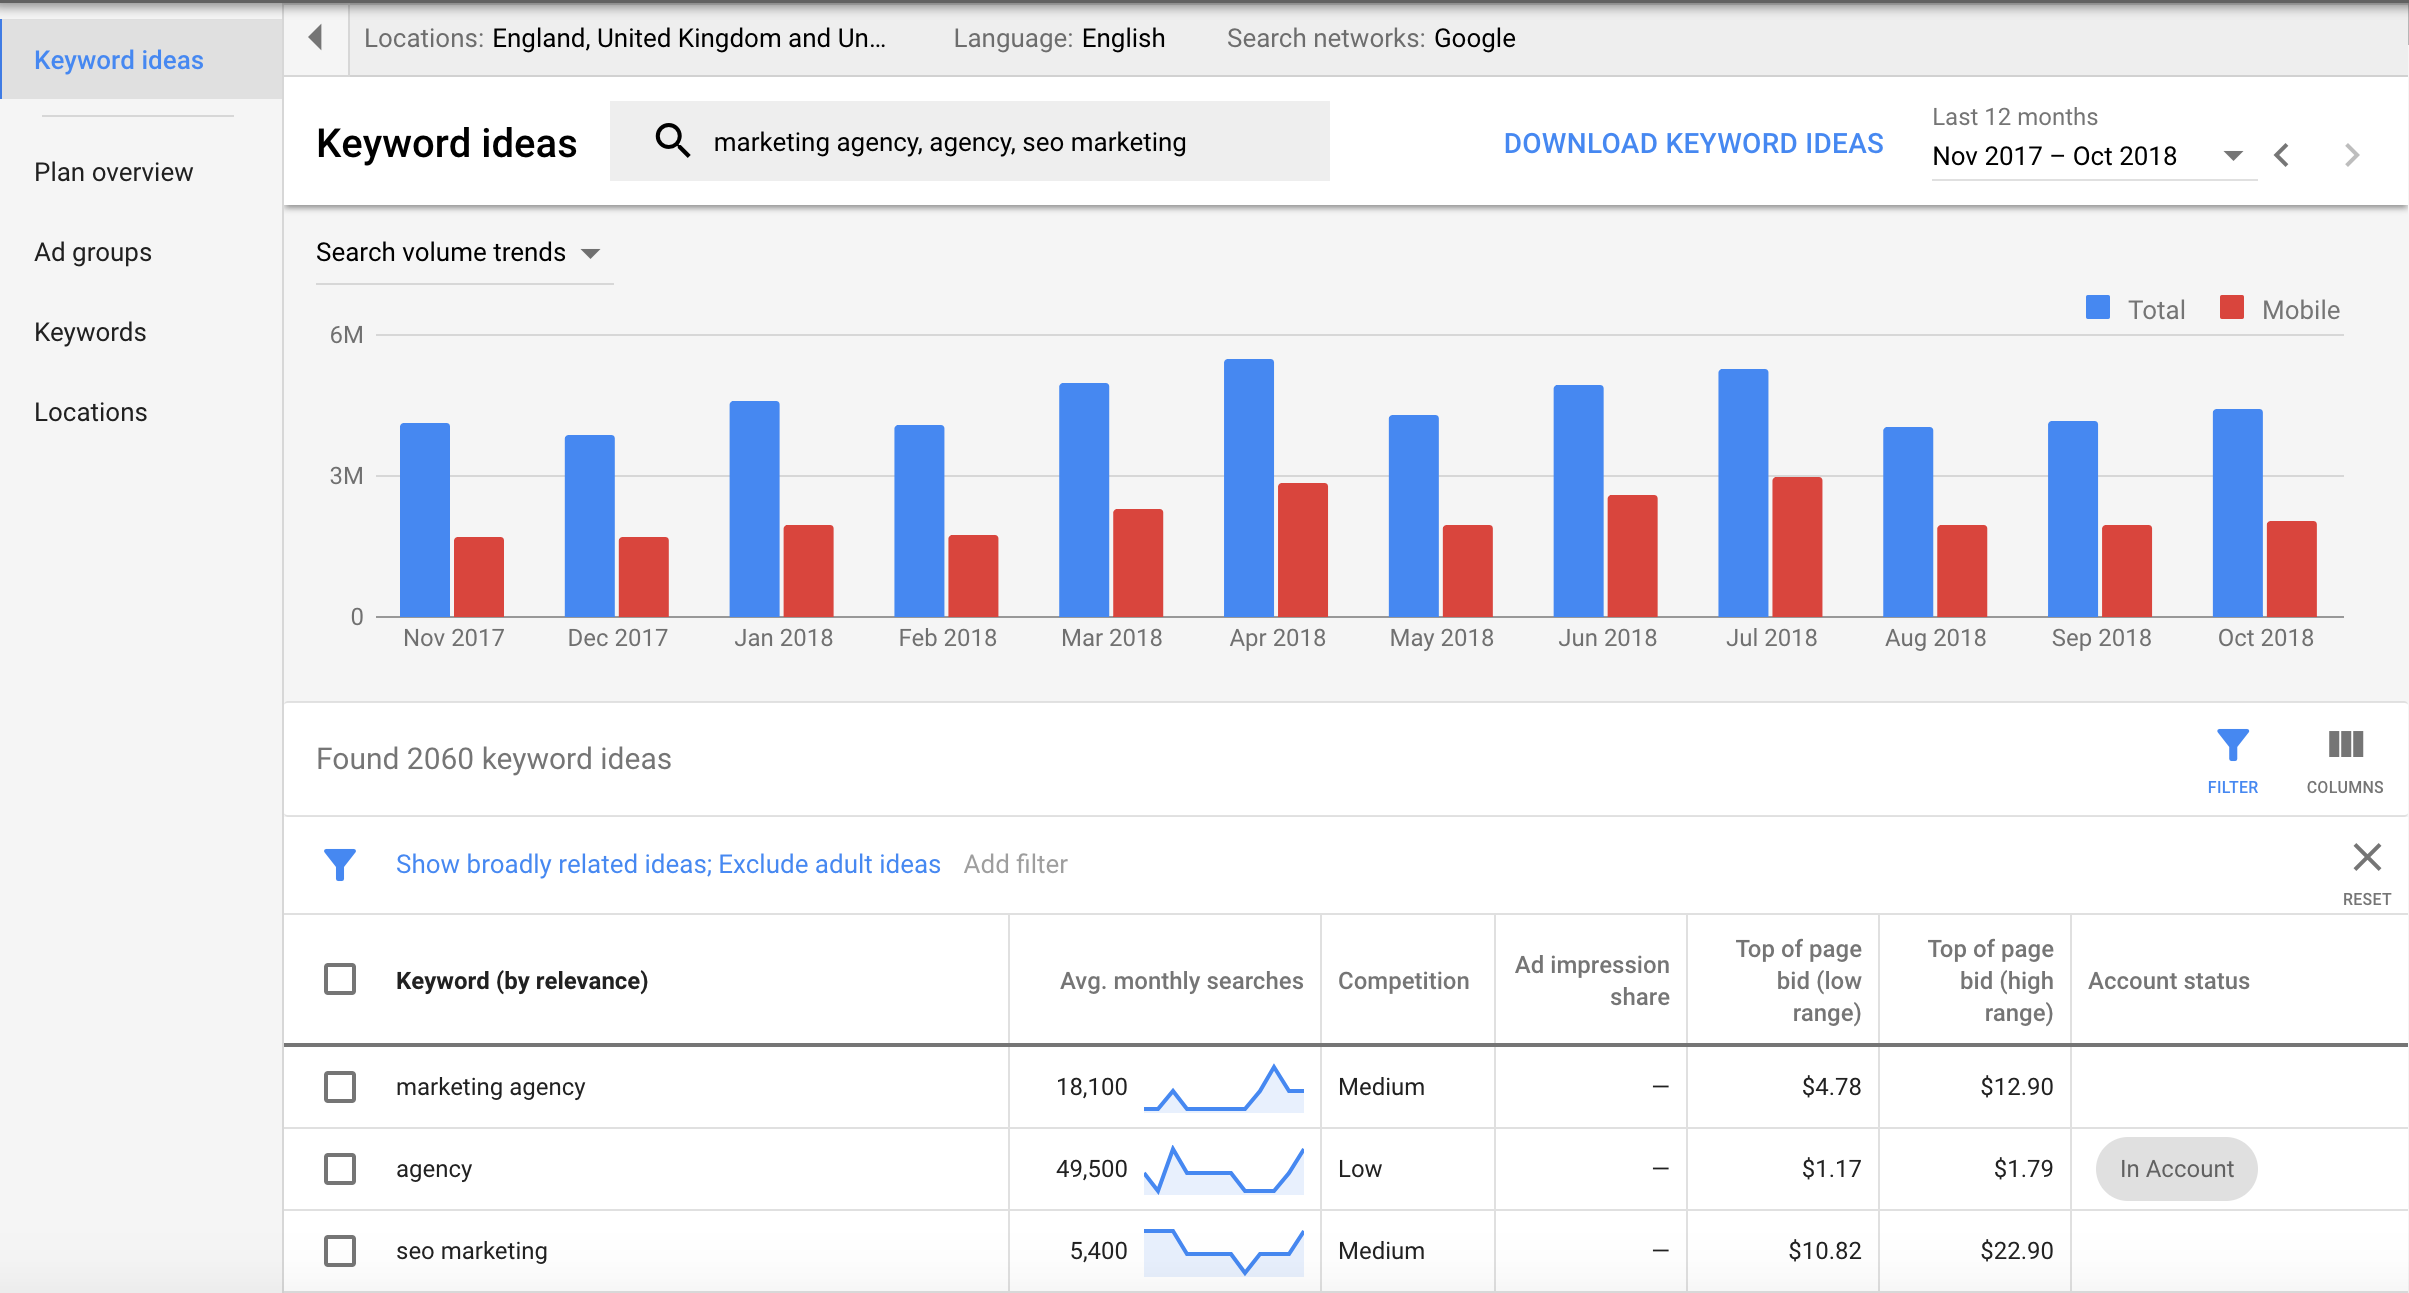 7 Ways to Use Google’s Keyword Planner That You Haven’t Thought Of